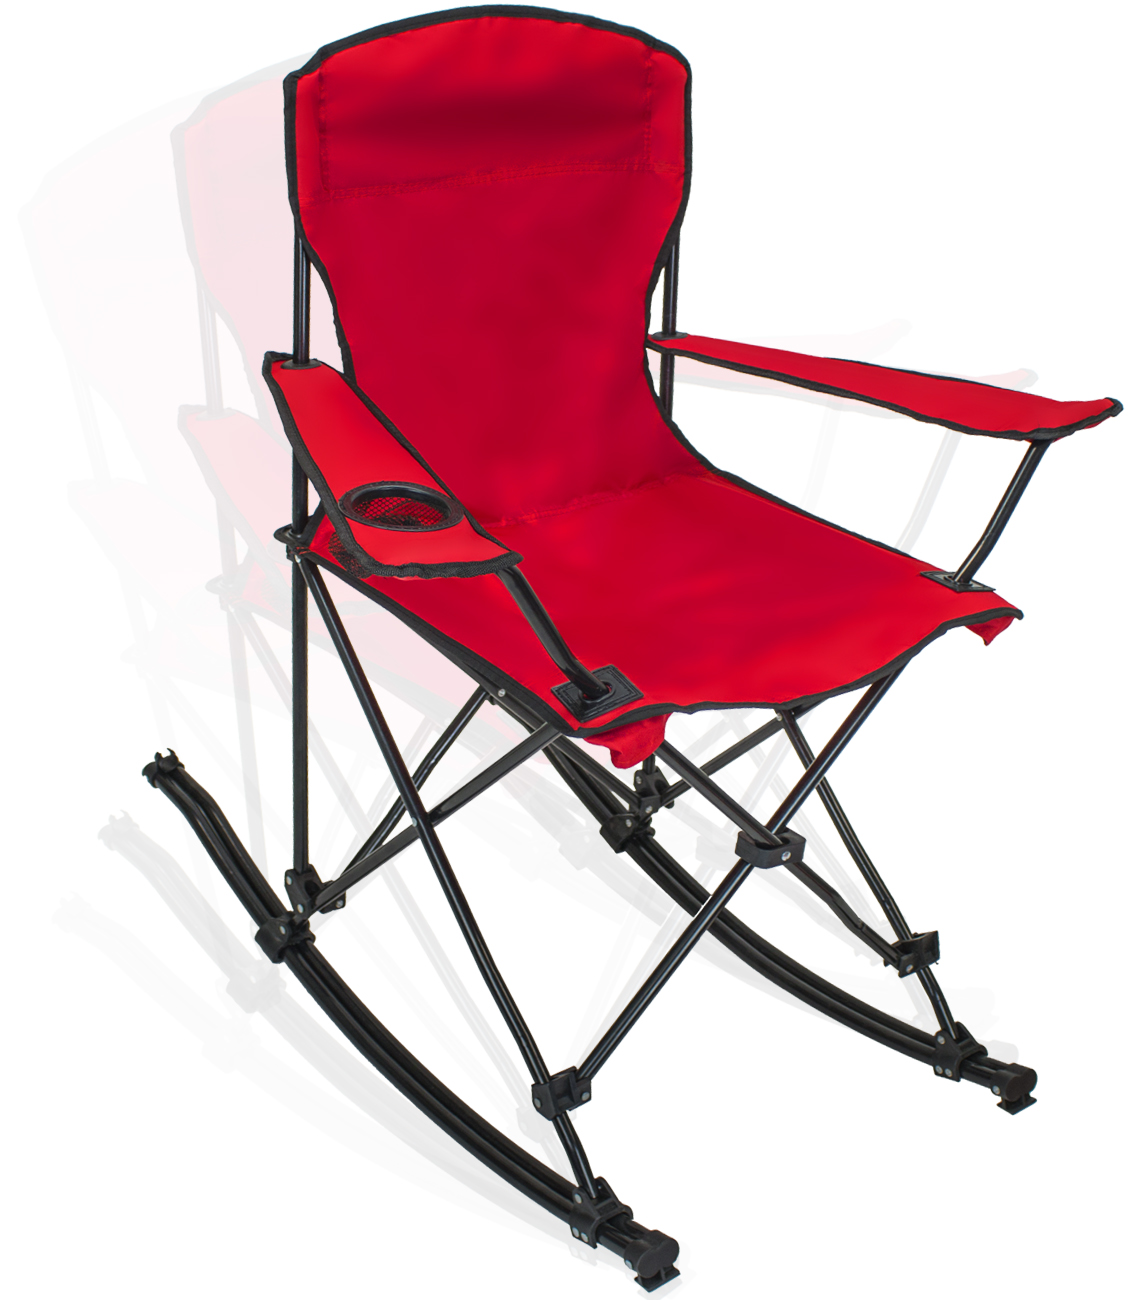 Sorbus Quad Rocking Chair with Cup Holder Cooler, Foldable Frame, and Portable Carry Bag, Recliner Chair Great&nbsp;Outdoor Chair&nbsp;for Camping, Sporting Events, Travel, Backyard, Patio, etc - image 4 of 13